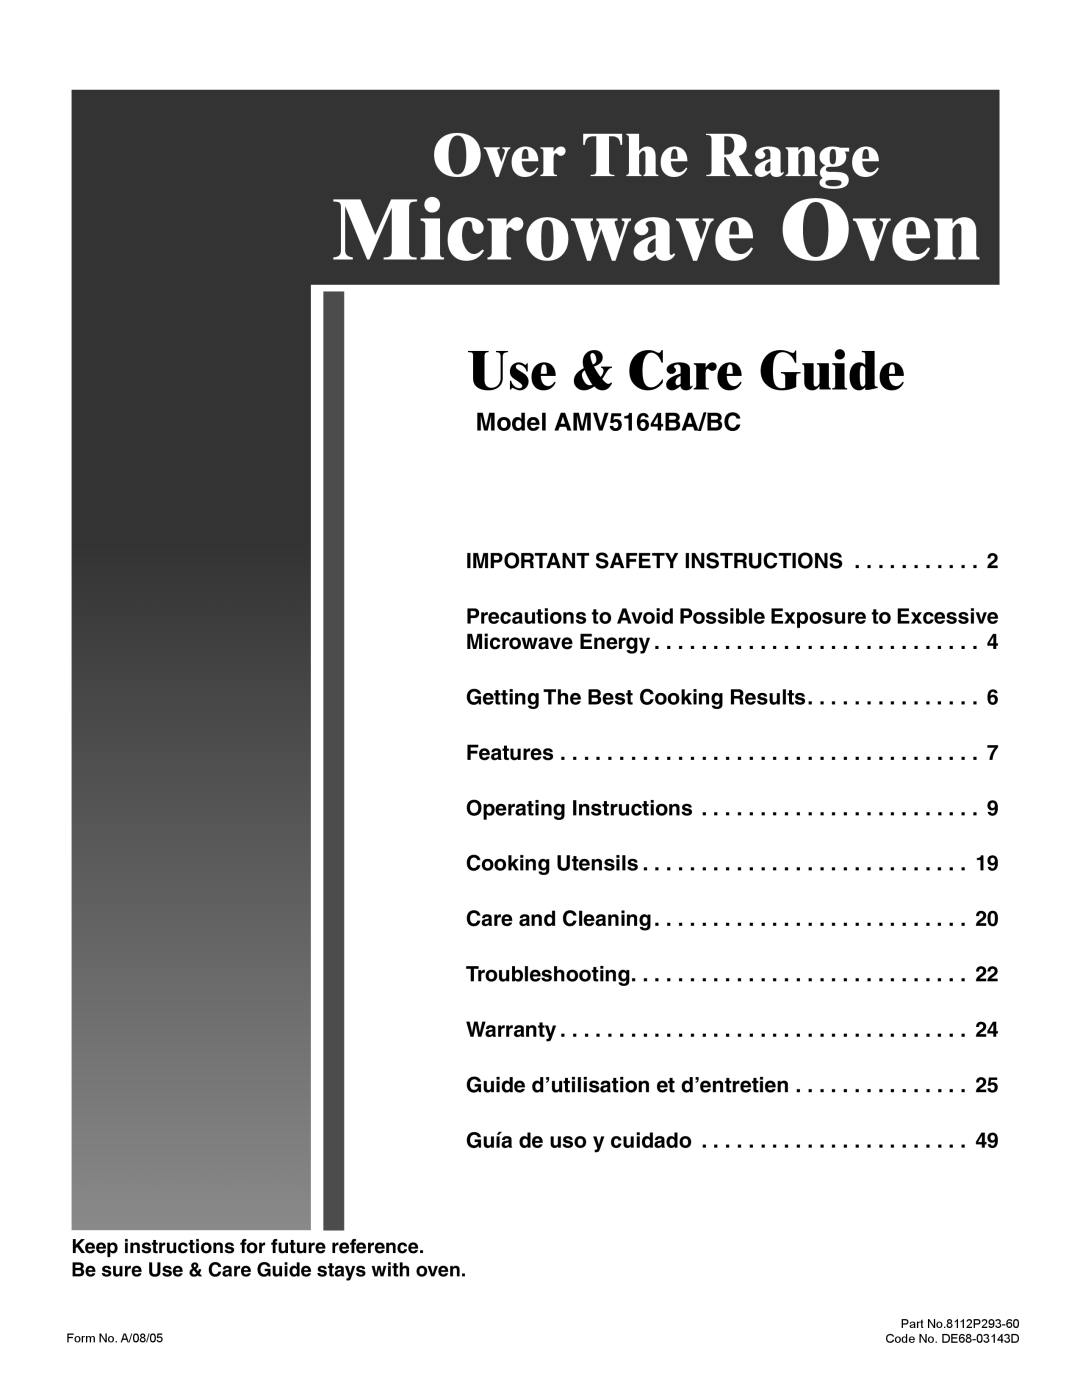 Amana important safety instructions Over The Range, Use & Care Guide, Model AMV5164BA/BC, Microwave Oven 